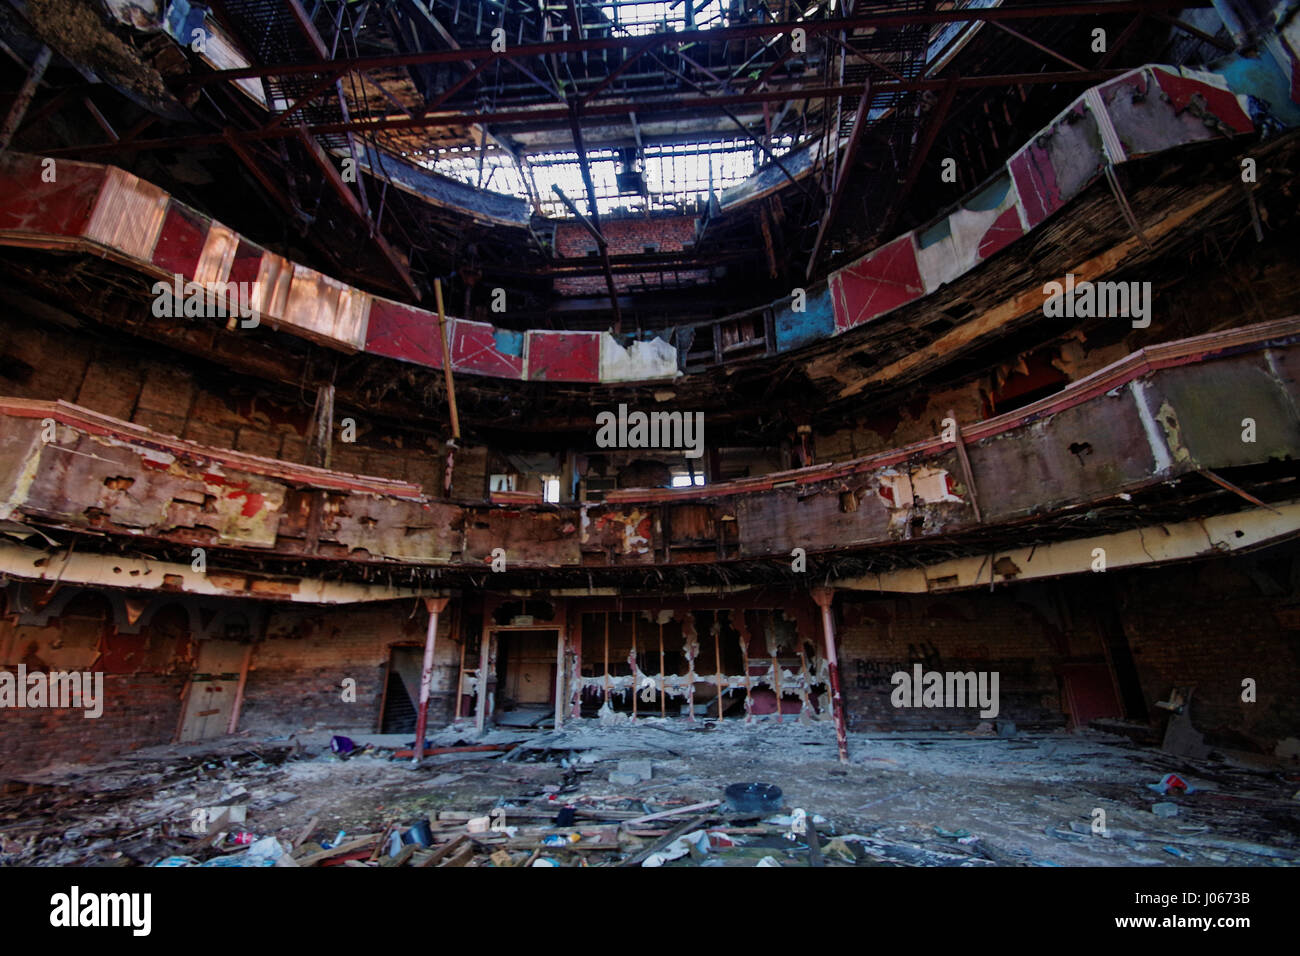 MANCHESTER, UK: SHOCKING pictures show the crumbling interior of a once great British theatre which now provides basic shelter to some of Manchester’s homeless. Pictures show the redbrick frontage of the imposing building which had the capacity to hold up to two and half thousand visitors as its original incarnation as a theatre, as well as the dilapidated interior which has clearly been left to rot.  British Builder James Cole (40) from Skipton was curious enough to venture inside this once grand setting to capture what remains of the Crown Theatre, also known as the Lyceum at Eccles, Manches Stock Photo